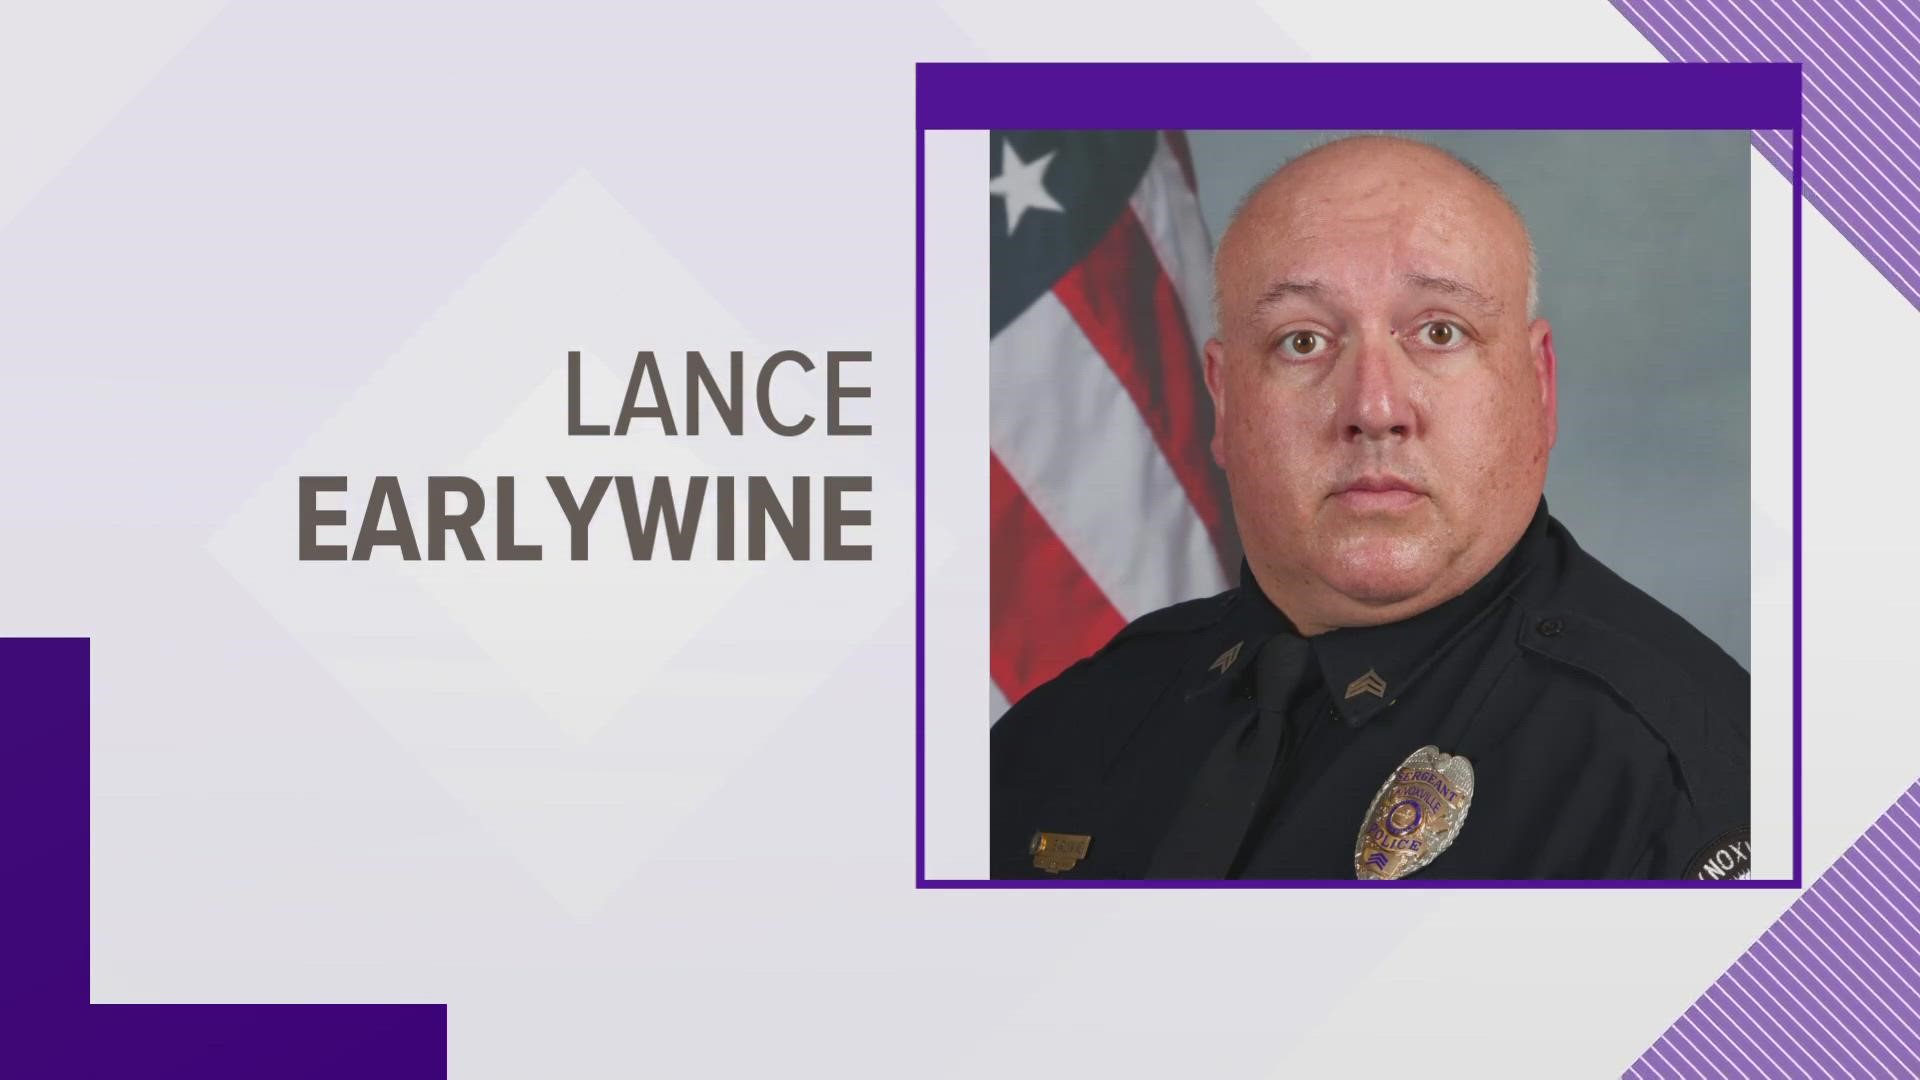 Lance Earlywine was fired in July 2022 after an Internal Affairs investigation found that he was untruthful in sworn statements.